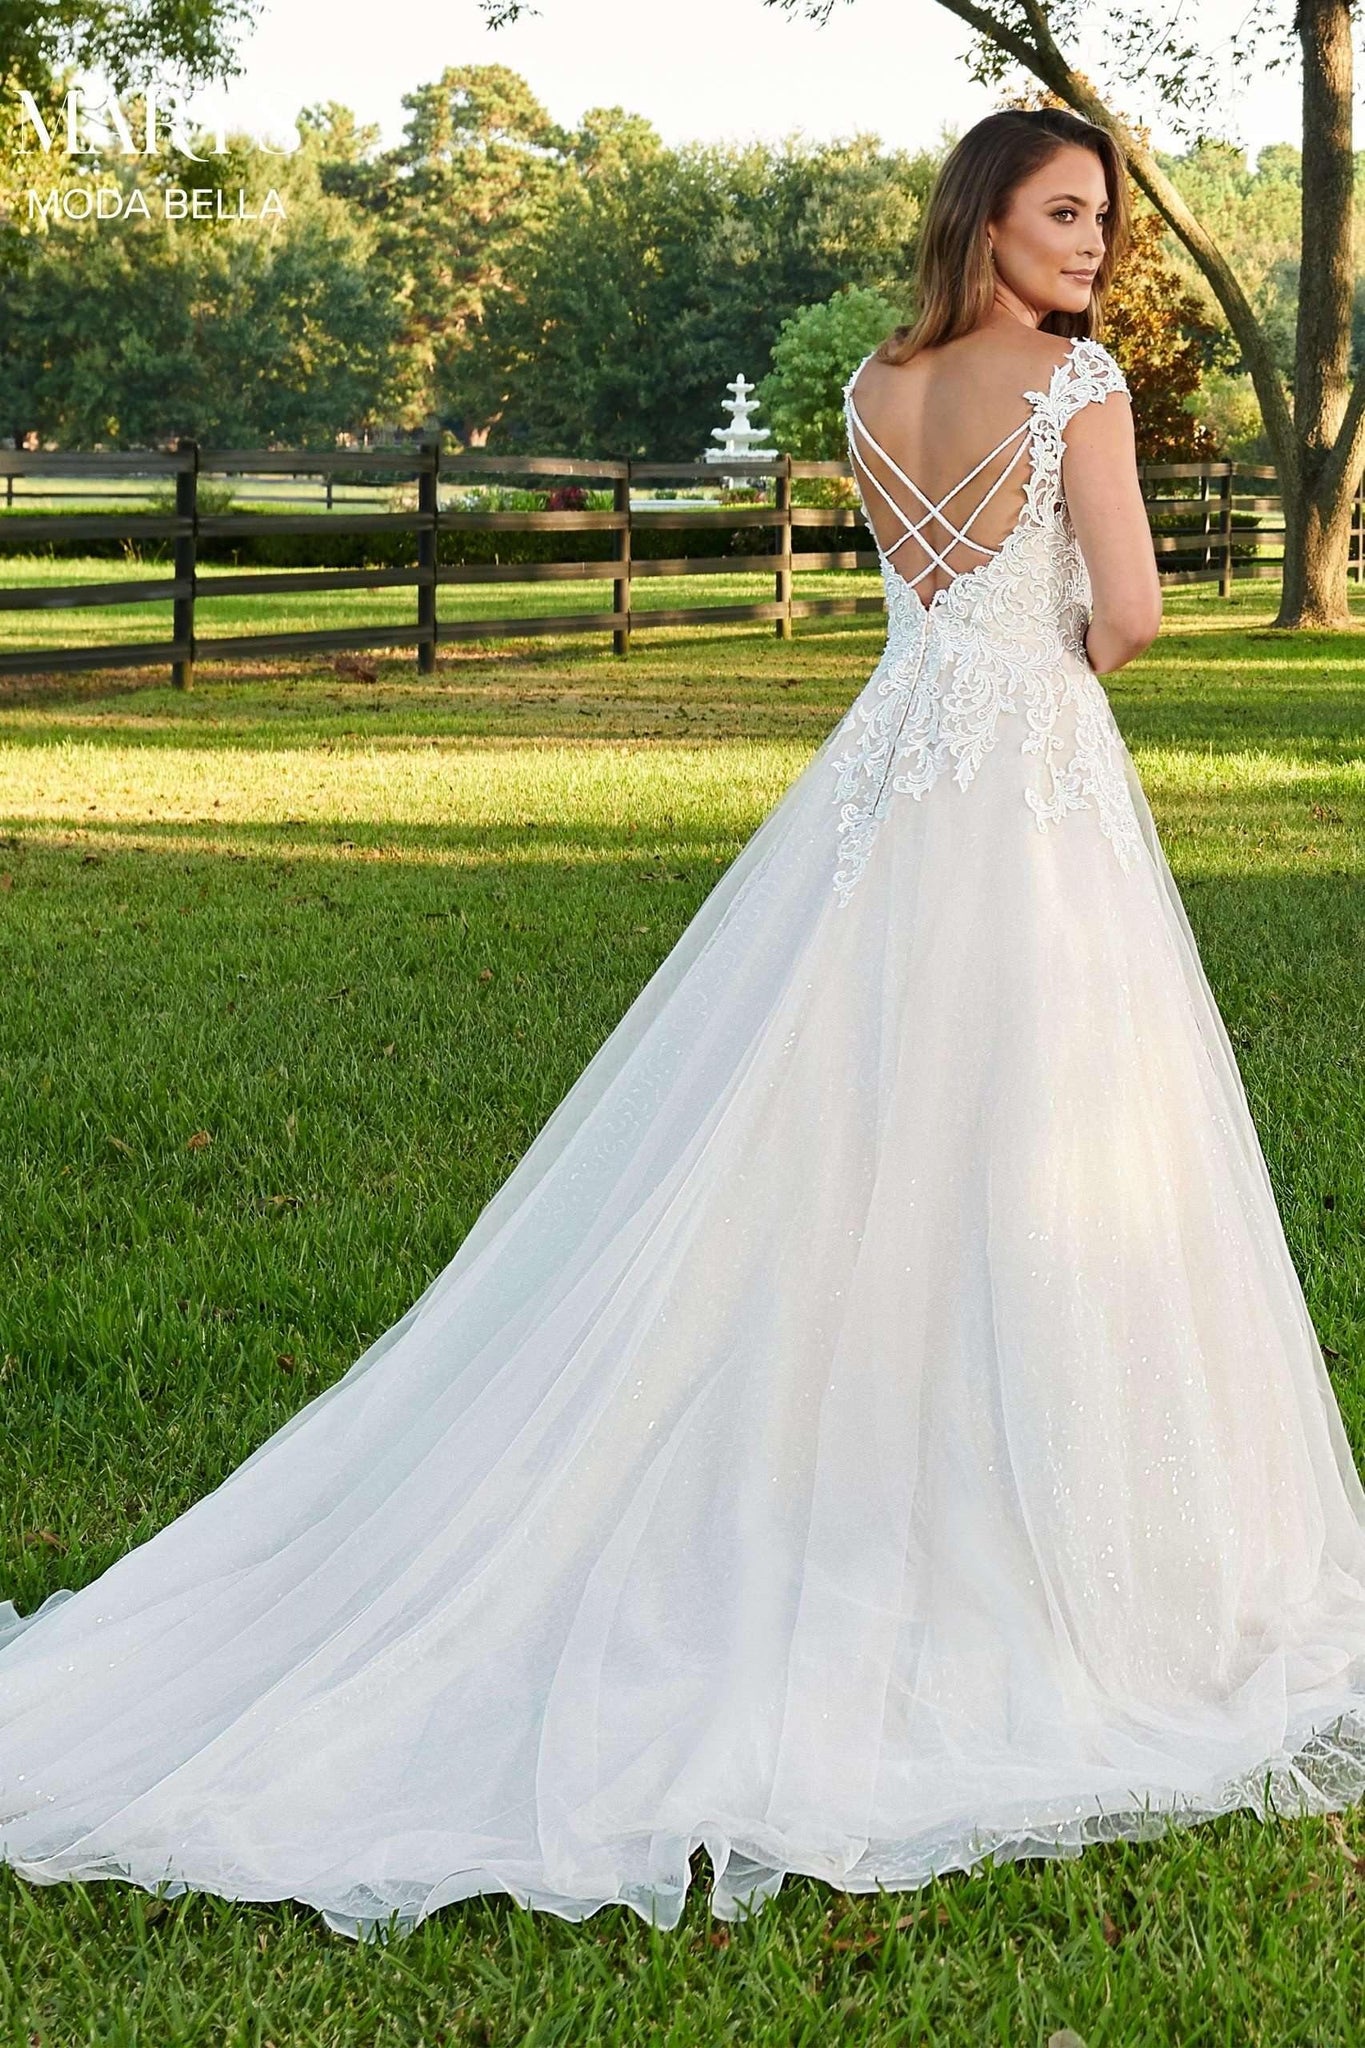 MARY'S BRIDAL - Helena - Adore Bridal and Occasion Wear